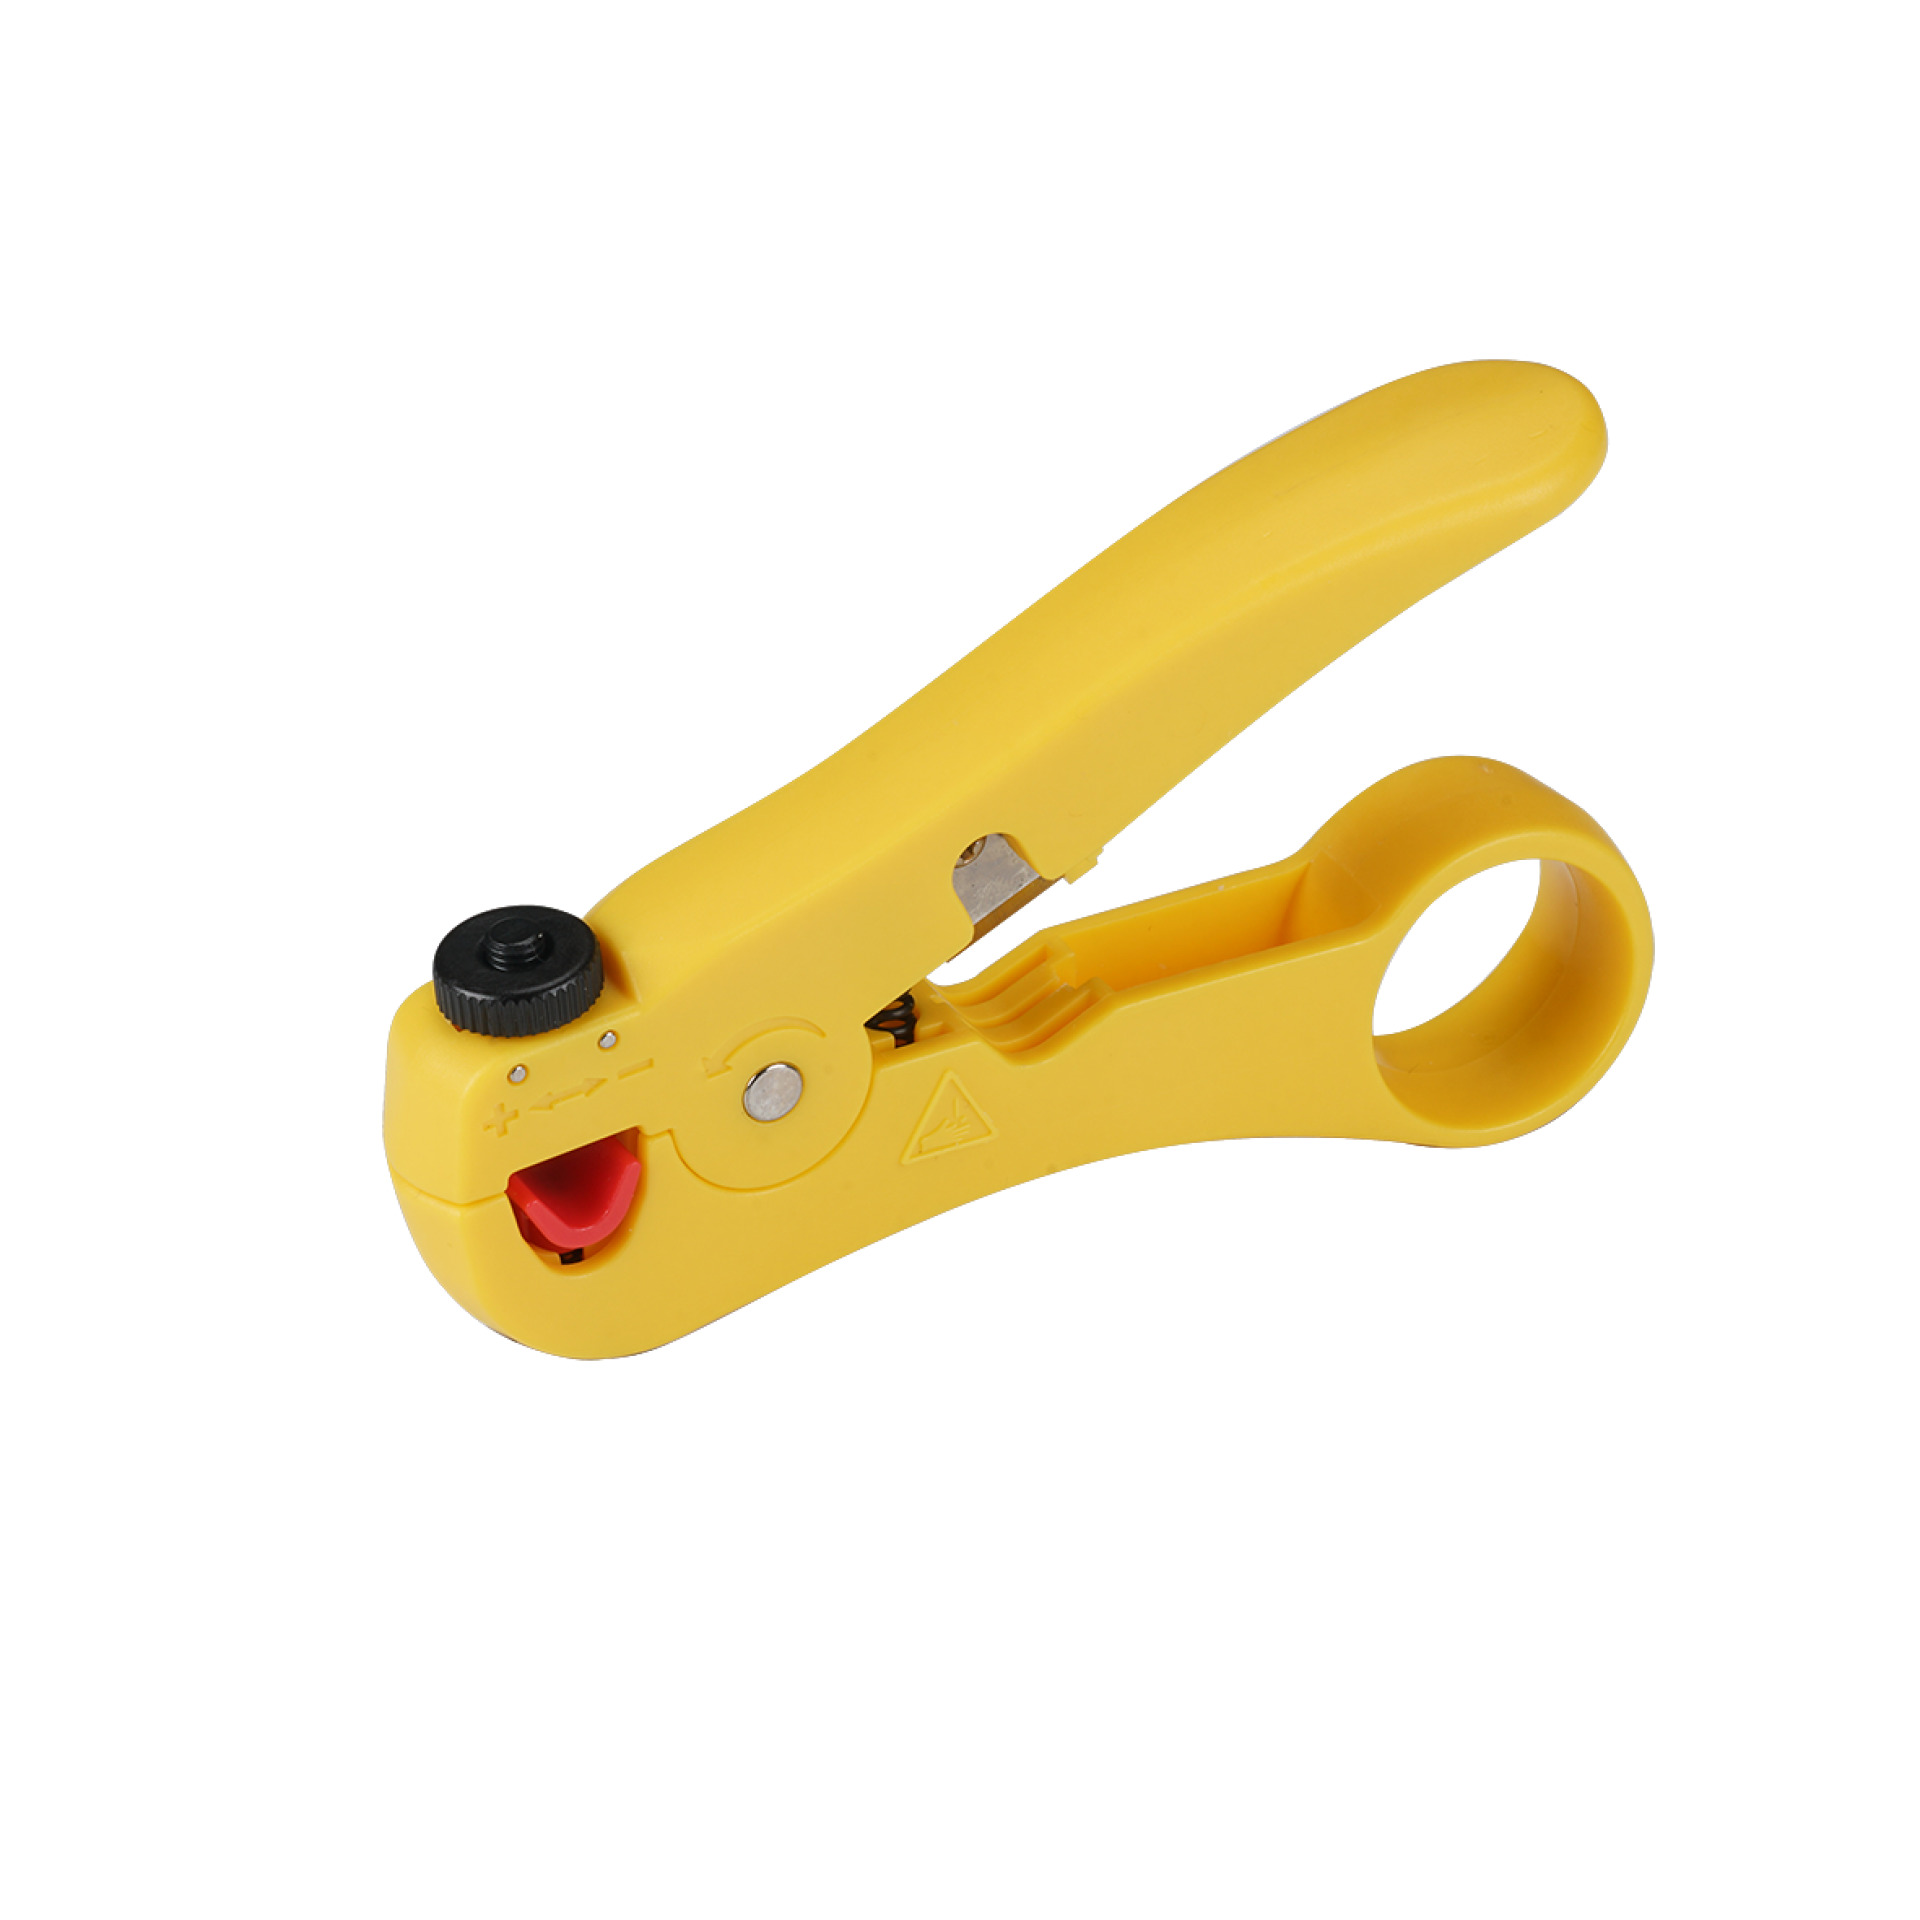 Cable Stripping Tool for cable, 3,5mm - 9mm